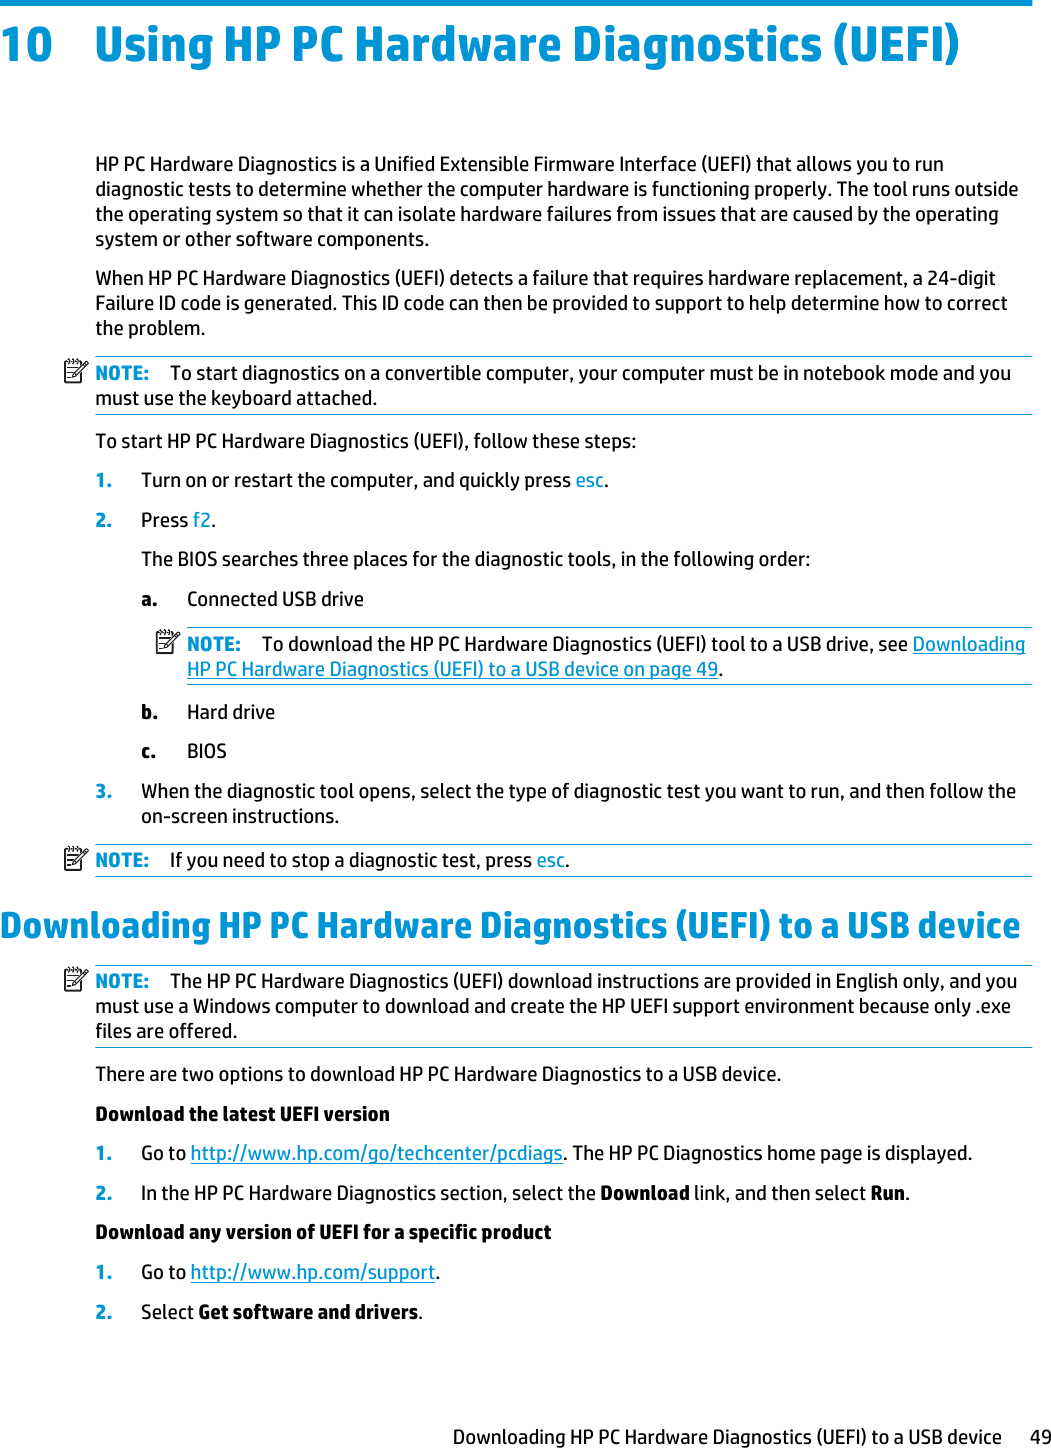 10 Using HP PC Hardware Diagnostics (UEFI)HP PC Hardware Diagnostics is a Unified Extensible Firmware Interface (UEFI) that allows you to run diagnostic tests to determine whether the computer hardware is functioning properly. The tool runs outside the operating system so that it can isolate hardware failures from issues that are caused by the operating system or other software components.When HP PC Hardware Diagnostics (UEFI) detects a failure that requires hardware replacement, a 24-digit Failure ID code is generated. This ID code can then be provided to support to help determine how to correct the problem.NOTE: To start diagnostics on a convertible computer, your computer must be in notebook mode and you must use the keyboard attached.To start HP PC Hardware Diagnostics (UEFI), follow these steps:1. Turn on or restart the computer, and quickly press esc.2. Press f2.The BIOS searches three places for the diagnostic tools, in the following order:a. Connected USB driveNOTE: To download the HP PC Hardware Diagnostics (UEFI) tool to a USB drive, see Downloading HP PC Hardware Diagnostics (UEFI) to a USB device on page 49.b. Hard drivec. BIOS3. When the diagnostic tool opens, select the type of diagnostic test you want to run, and then follow the on-screen instructions.NOTE: If you need to stop a diagnostic test, press esc.Downloading HP PC Hardware Diagnostics (UEFI) to a USB deviceNOTE: The HP PC Hardware Diagnostics (UEFI) download instructions are provided in English only, and you must use a Windows computer to download and create the HP UEFI support environment because only .exe files are offered.There are two options to download HP PC Hardware Diagnostics to a USB device.Download the latest UEFI version1. Go to http://www.hp.com/go/techcenter/pcdiags. The HP PC Diagnostics home page is displayed.2. In the HP PC Hardware Diagnostics section, select the Download link, and then select Run.Download any version of UEFI for a specific product1. Go to http://www.hp.com/support.2. Select Get software and drivers.Downloading HP PC Hardware Diagnostics (UEFI) to a USB device 49